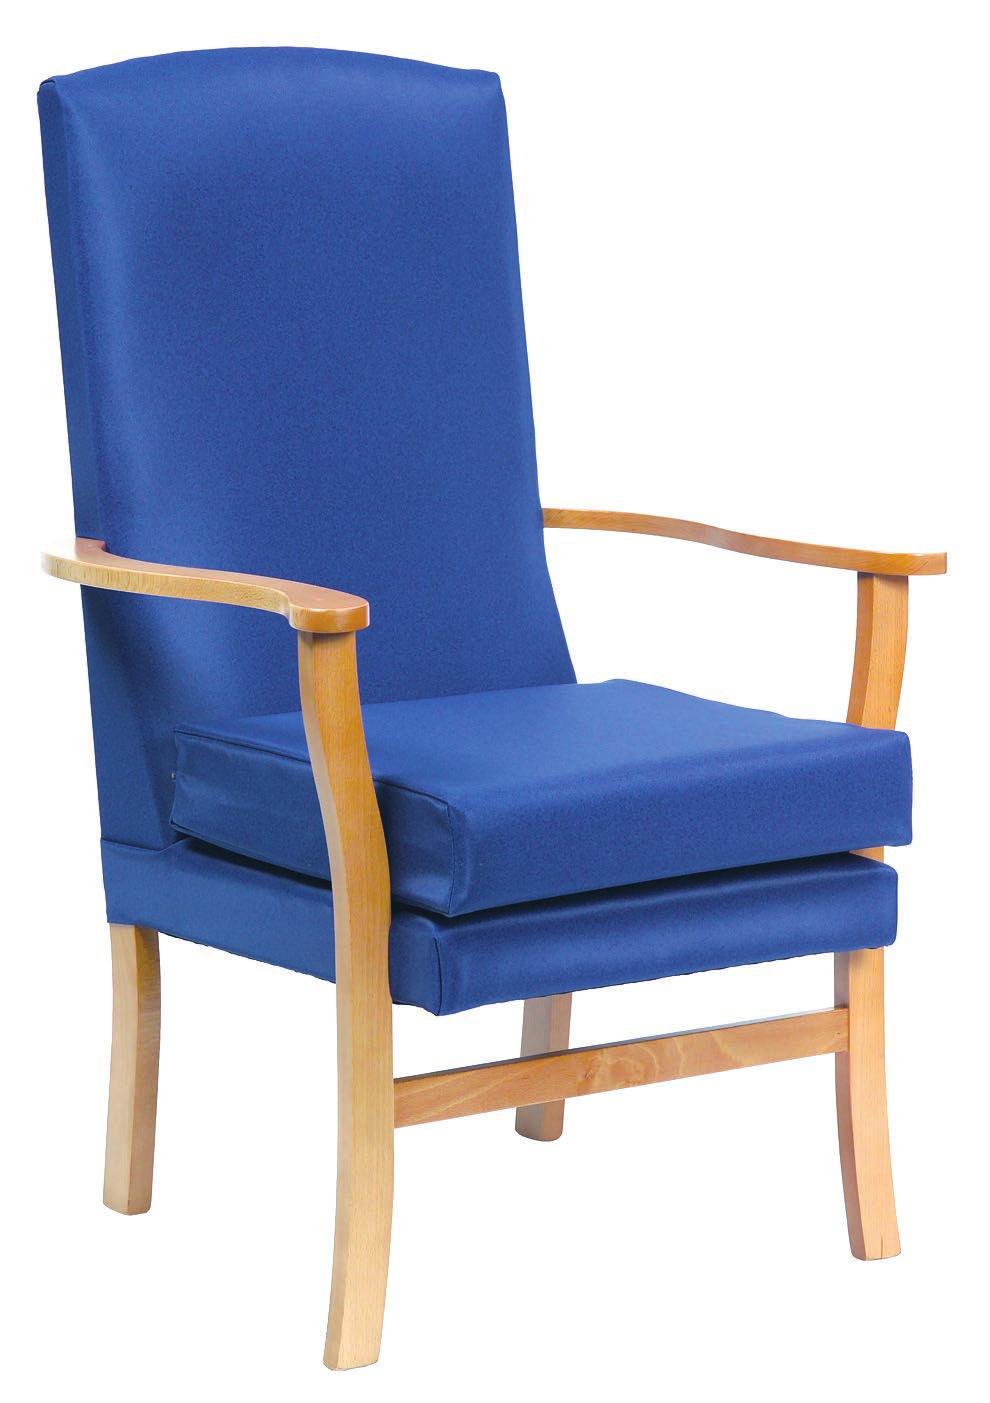 PATIENT SEATING Sanday The Sanday high back patient chair boasts a high level of comfort as well as a classic wooden